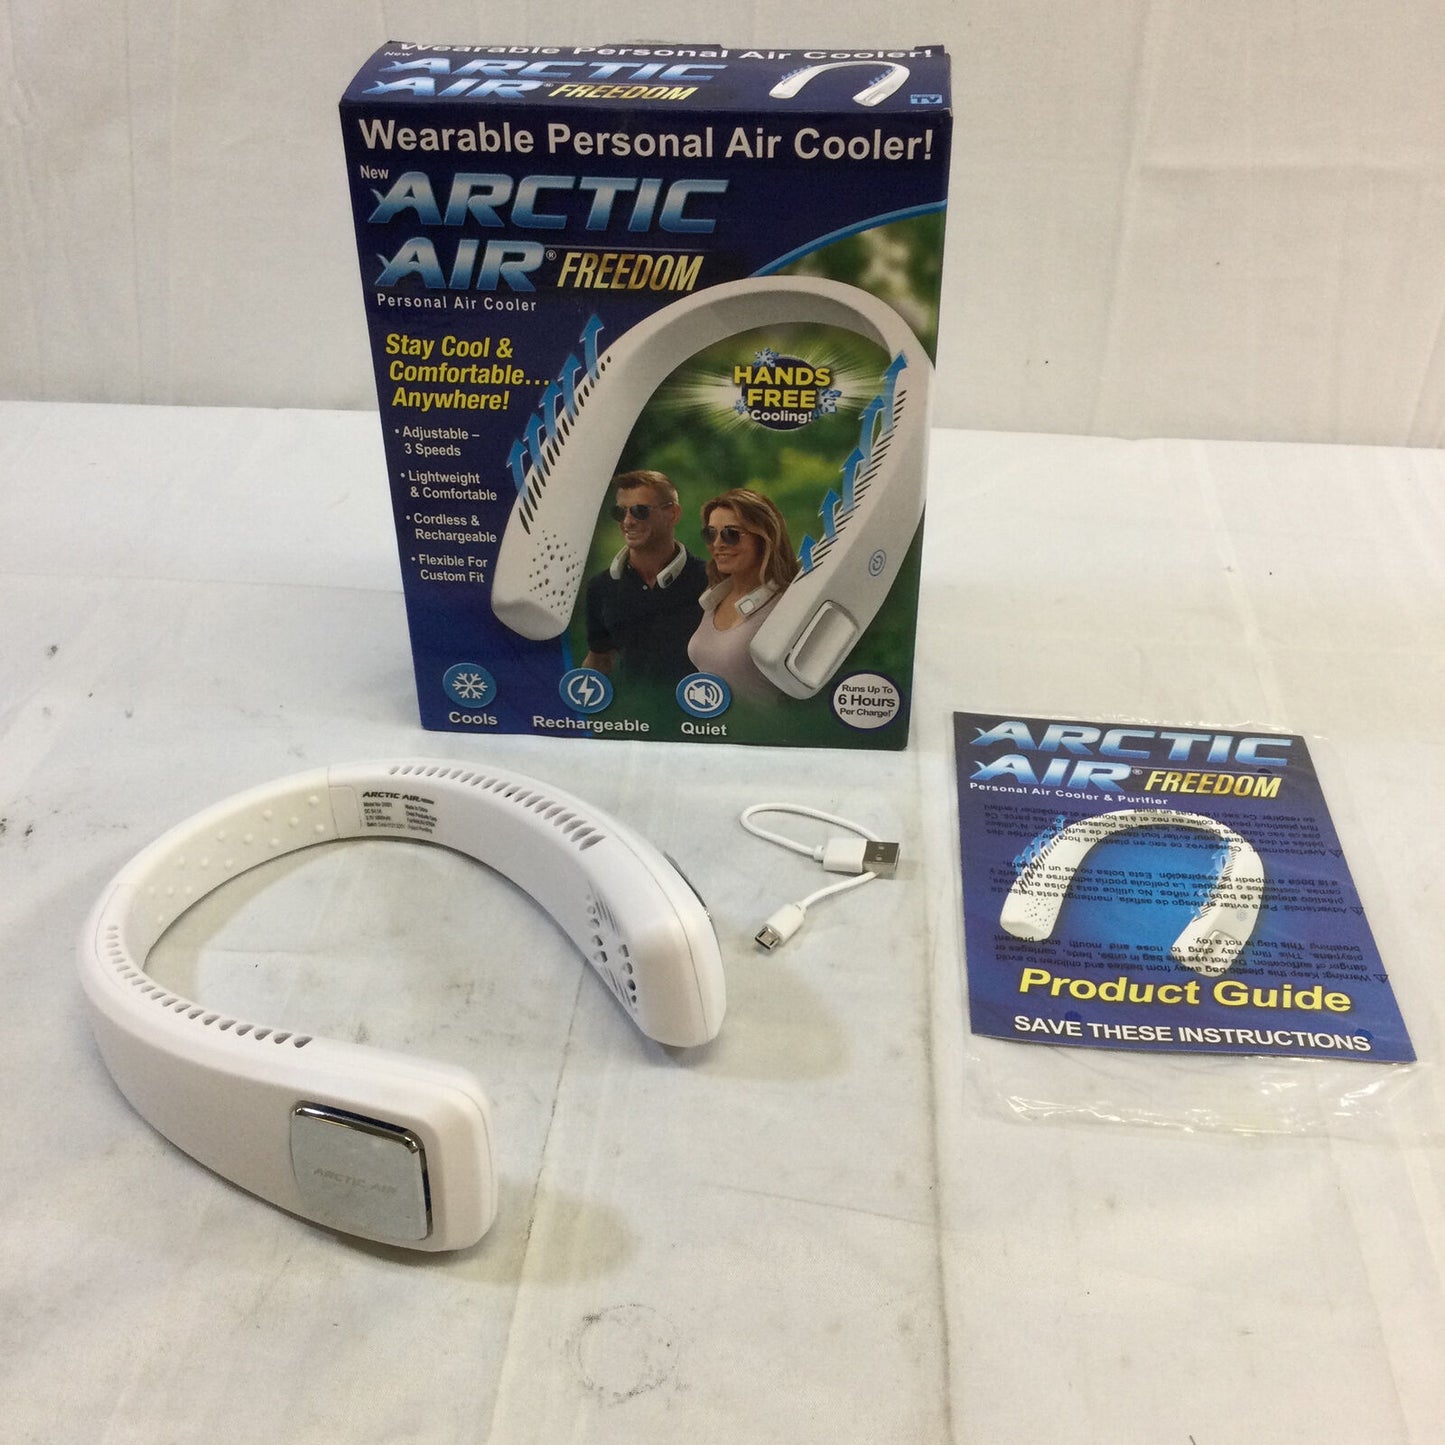 Arctic Air Freedom Handsfree Portable Personal Air Cooler Neck Fan